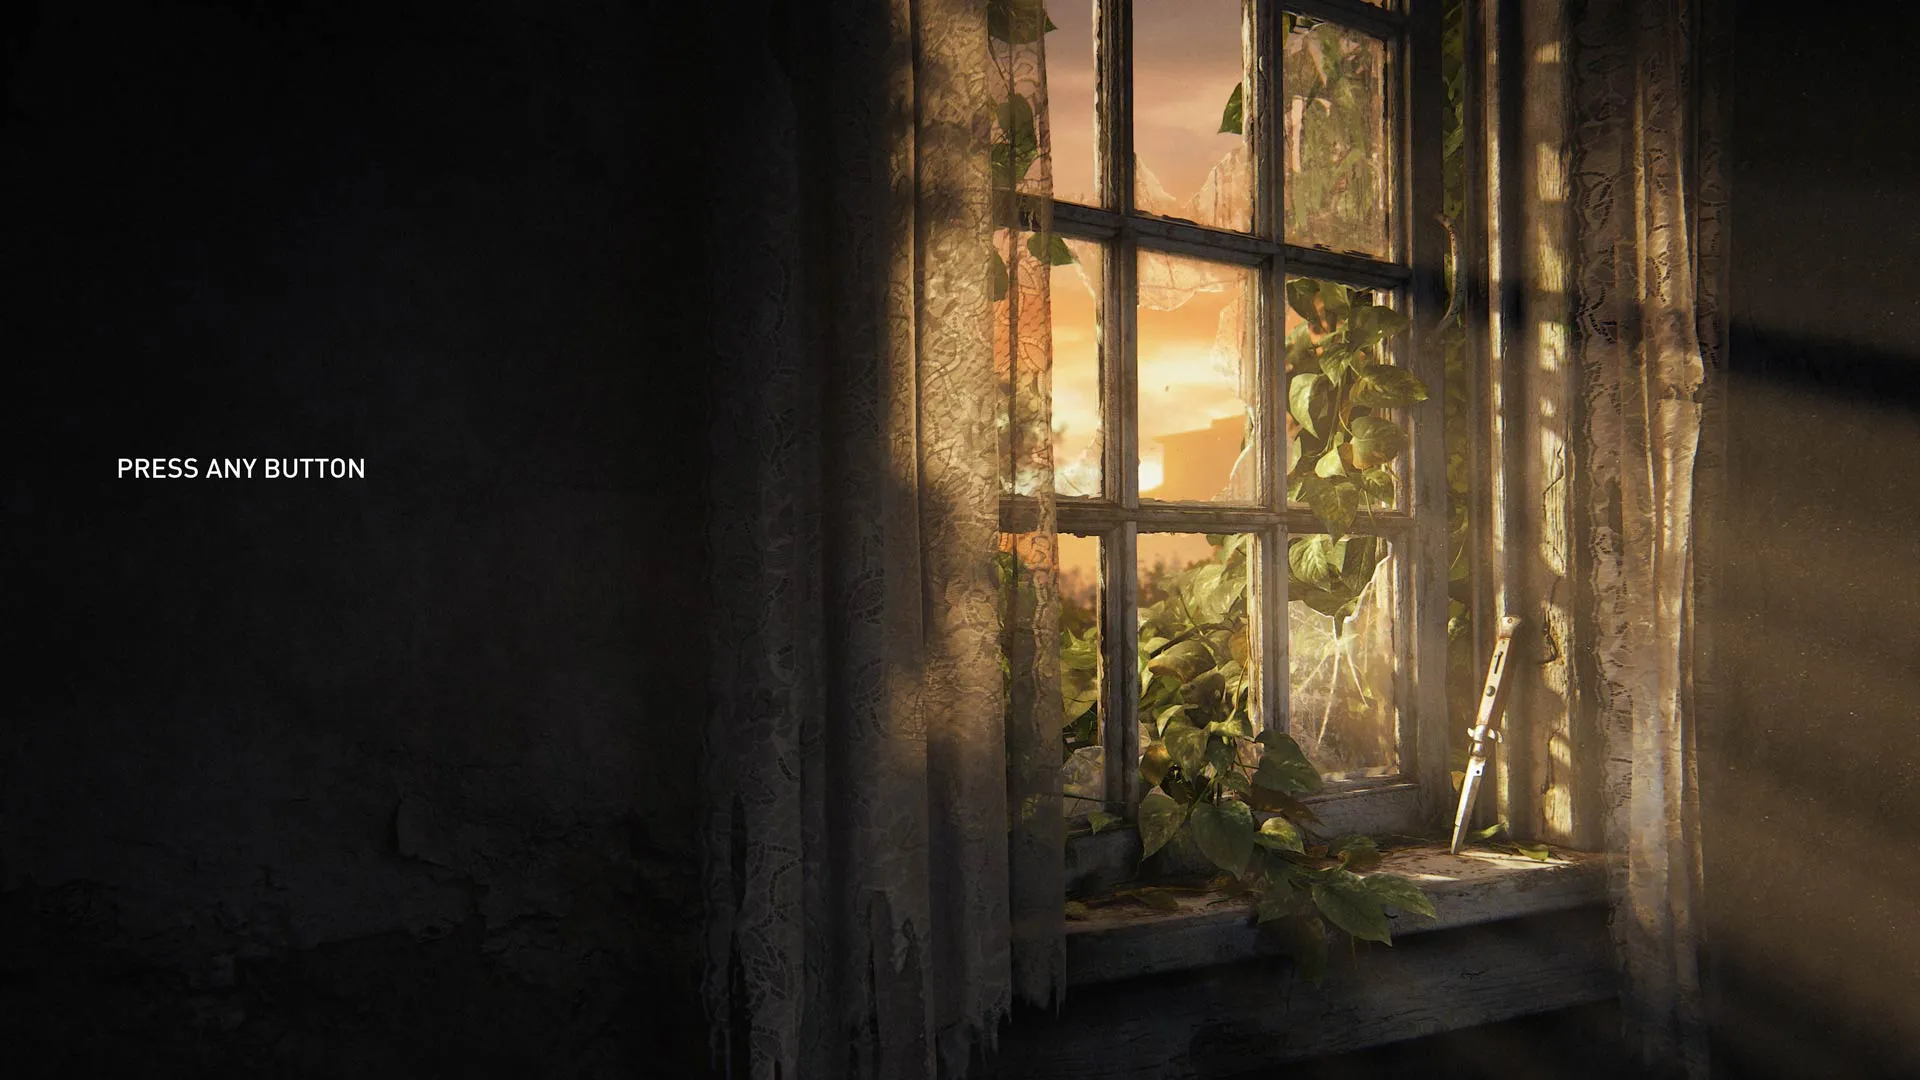 The Last of Us Part 1 Remake review embargo lifts soon